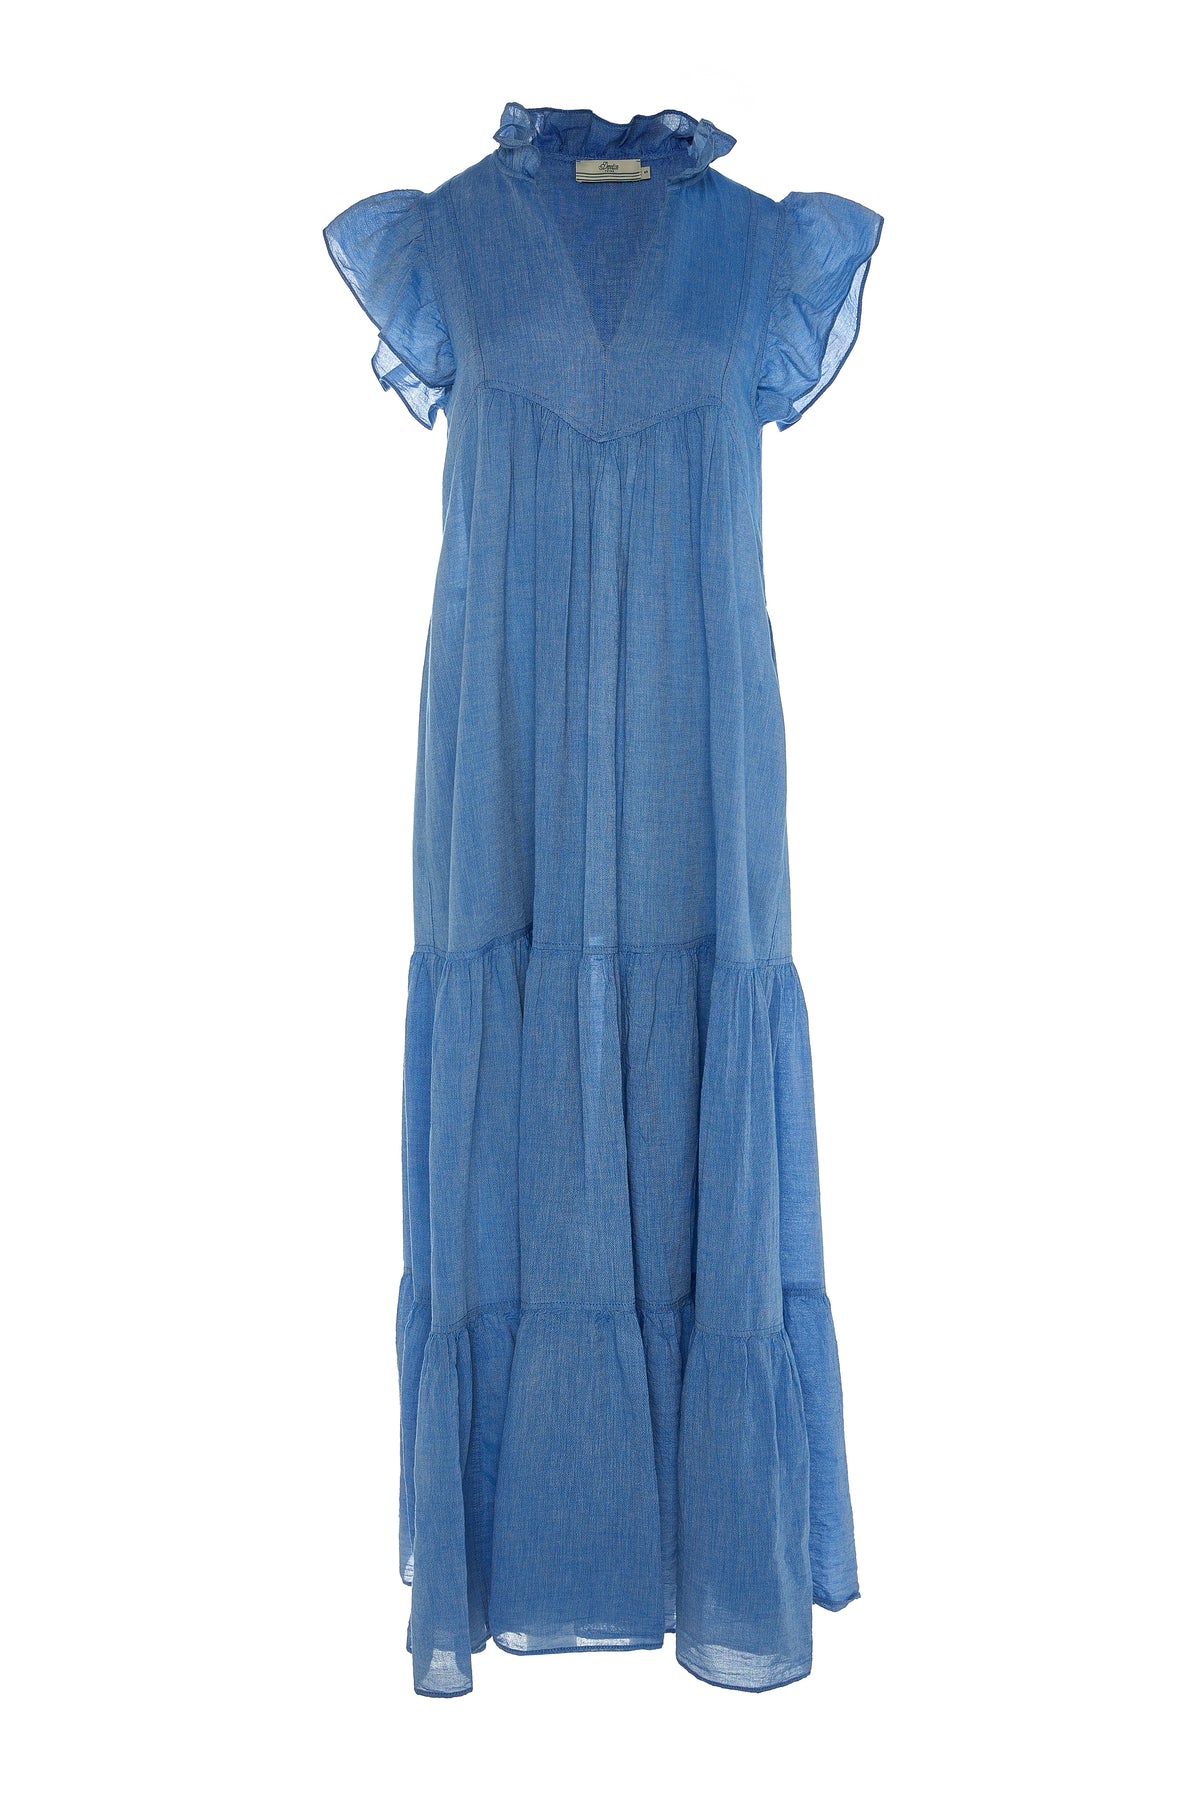 Maxi blue dress with ruffle short sleeves and collar with tiered skirt